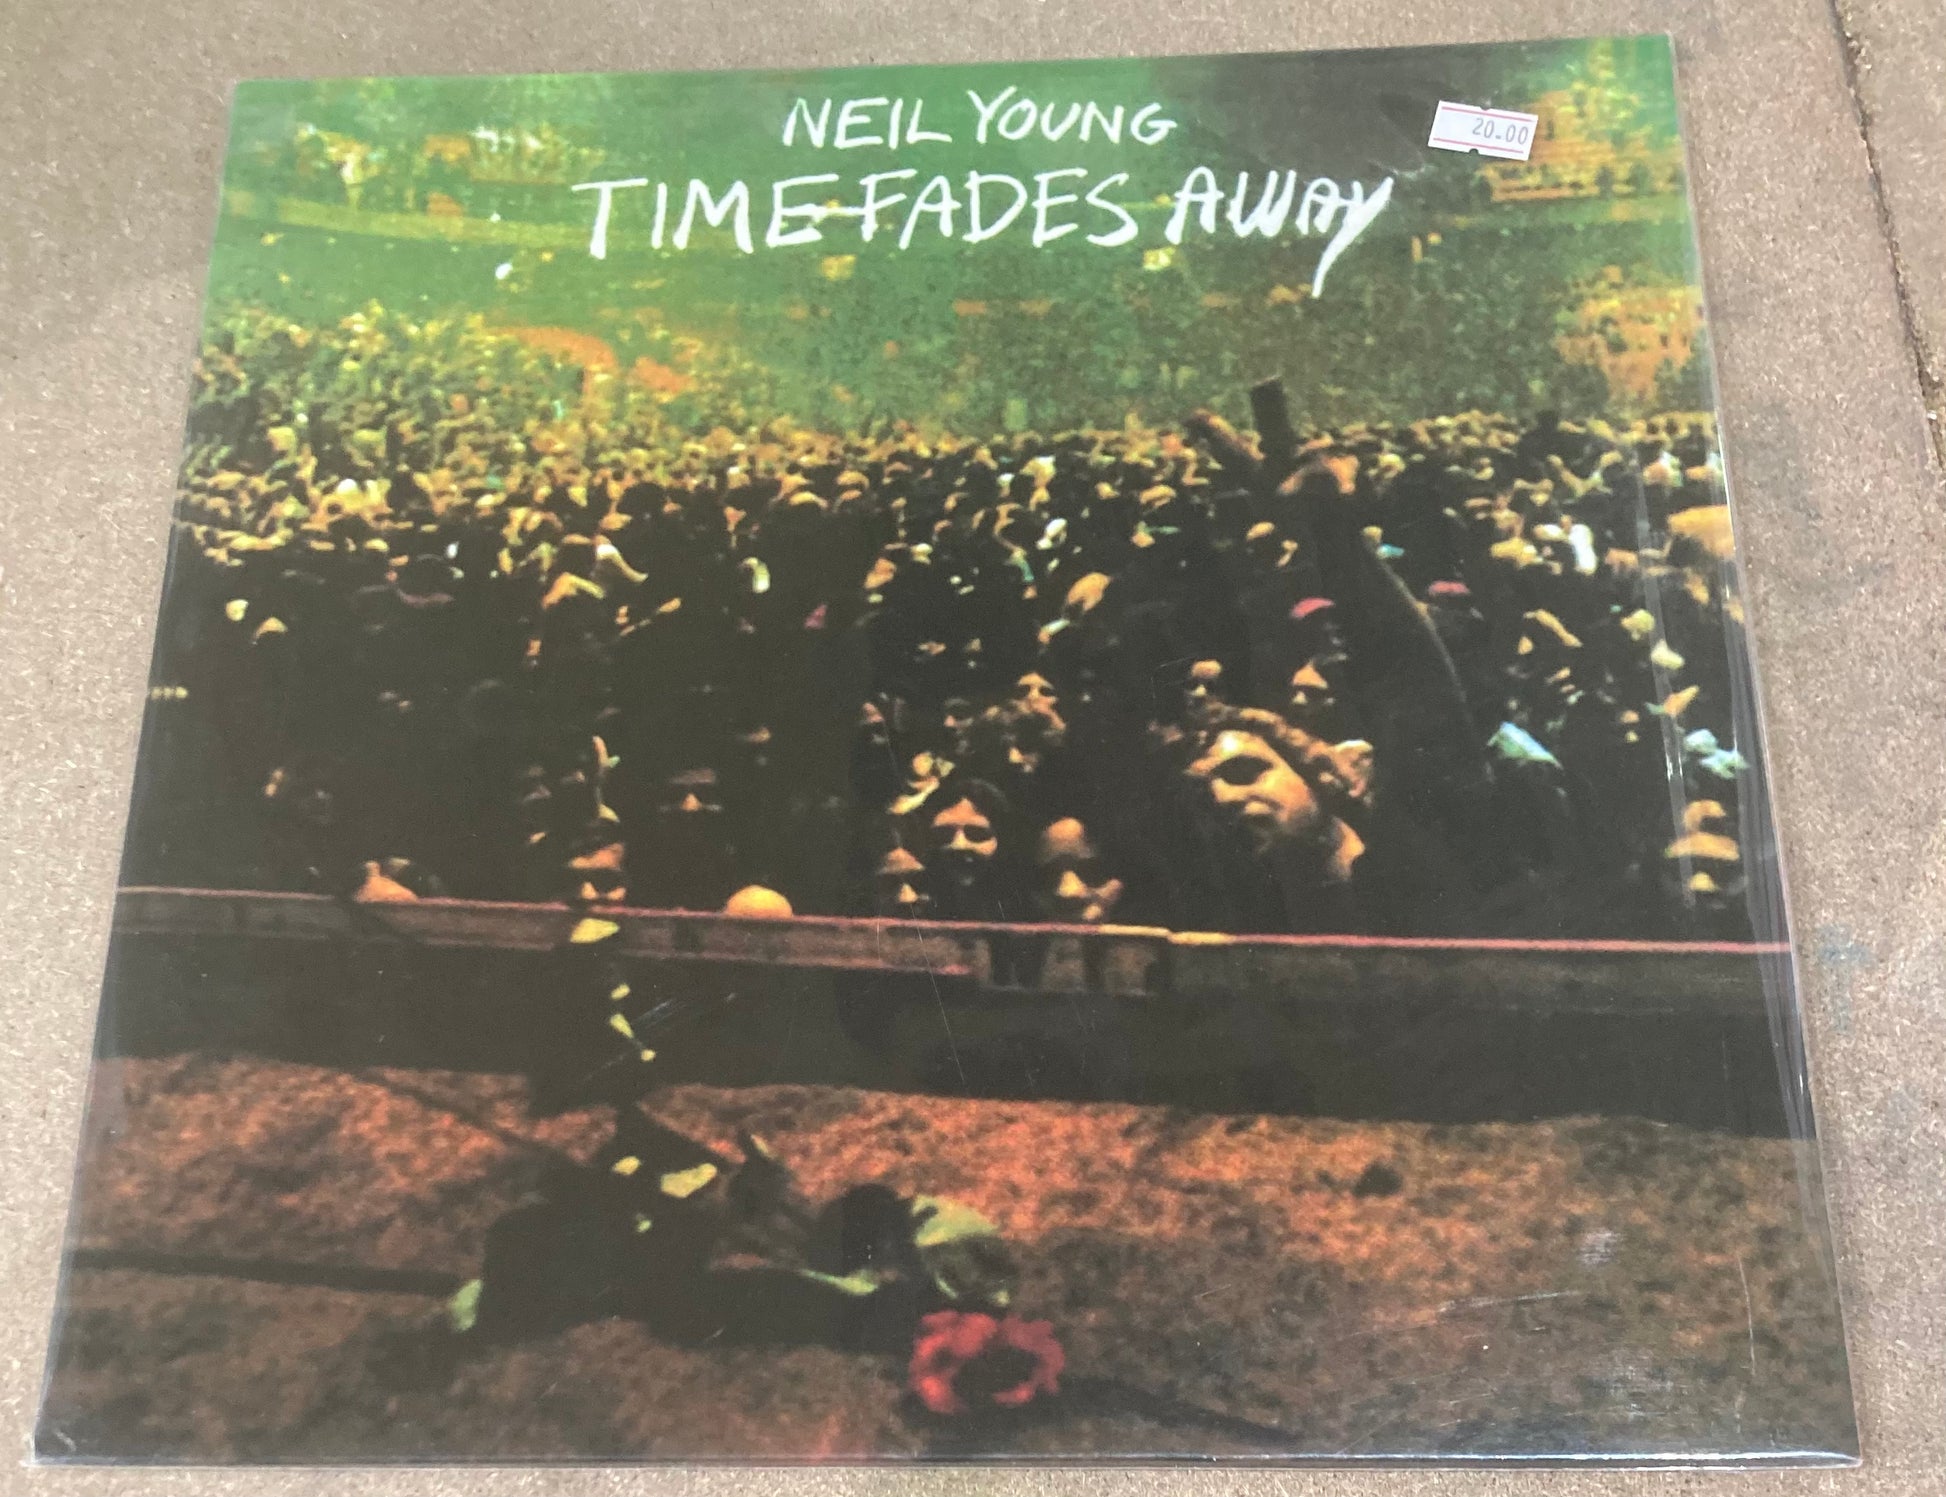 The front of ‘Neil Young - Time Fades Away’ on vinyl